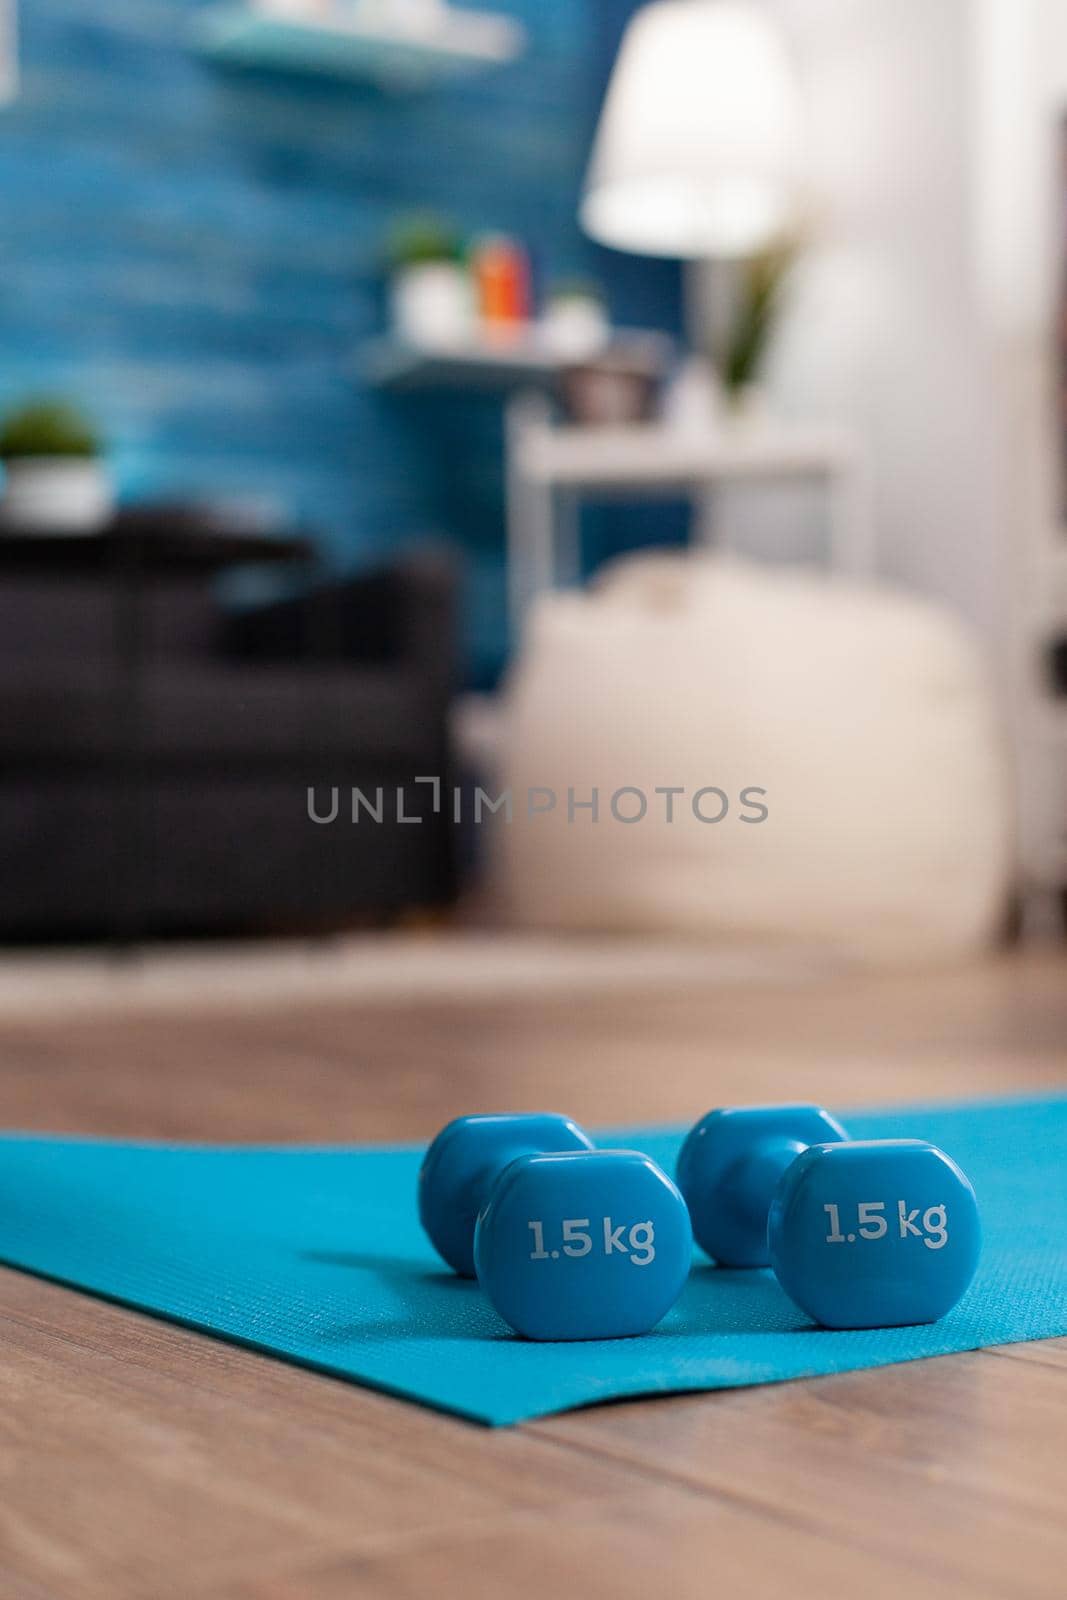 Aerobic empty living room with nobody in it having fitness dumbbells standing on yoga mat waiting for sportperson working at wellness workout doing physical exercises. Close-up of sports equipment